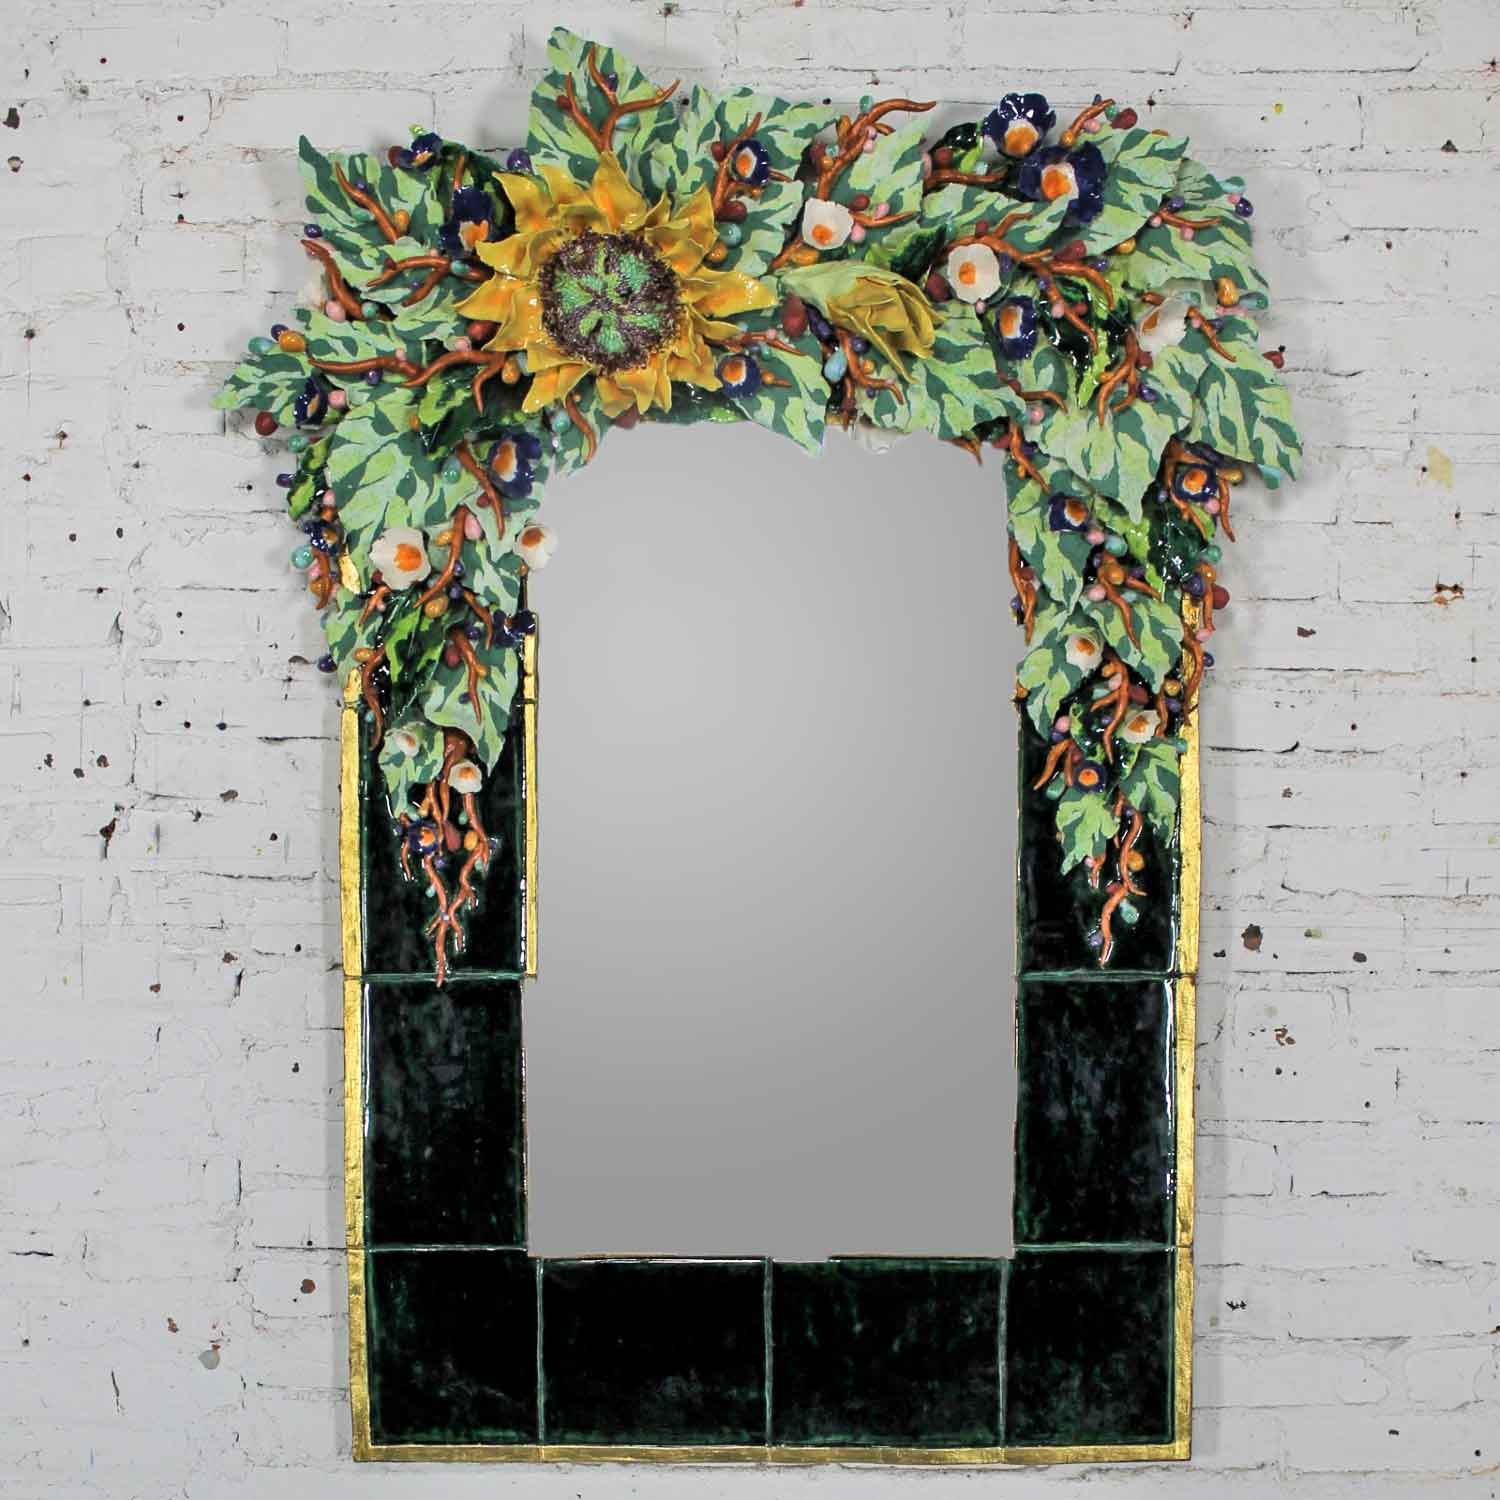 Contemporary Ceramic Floral Large Mirror by George Alexander Mirror: • O/A Height – 55 Inches • O/A Width – 42 Inches • O/A Depth – 7.5 Inches • Mirror Glass Size – 31x17.5 Inches • Mirror Frame Width – 7.5 (sides) & 8.5 (bottom) Inches • Weight – 105 Pounds Crated Size: • Height – 62 Inches • Width – 48 Inches • Depth – 24 Inches • Weight – 365 Pounds